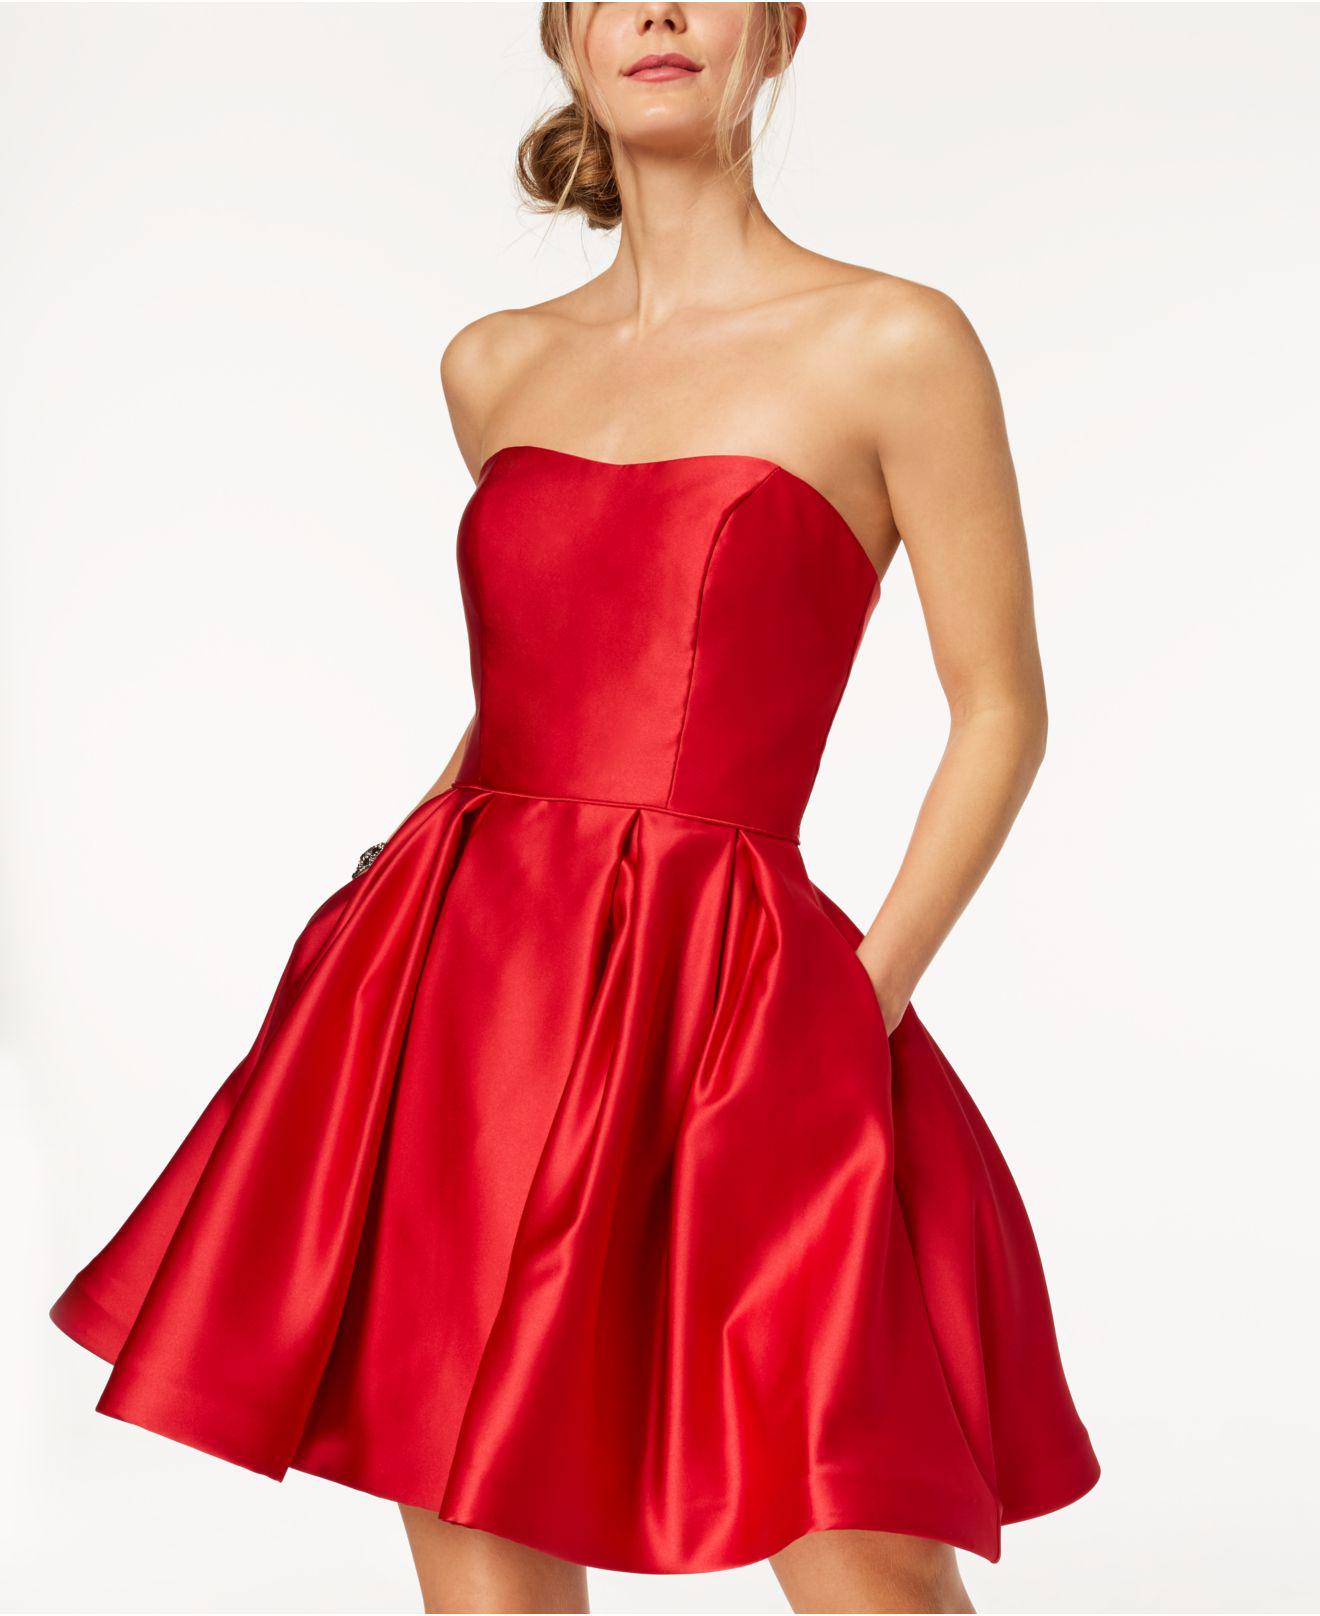 & Adam Strapless Fit & Dress in Red | Lyst